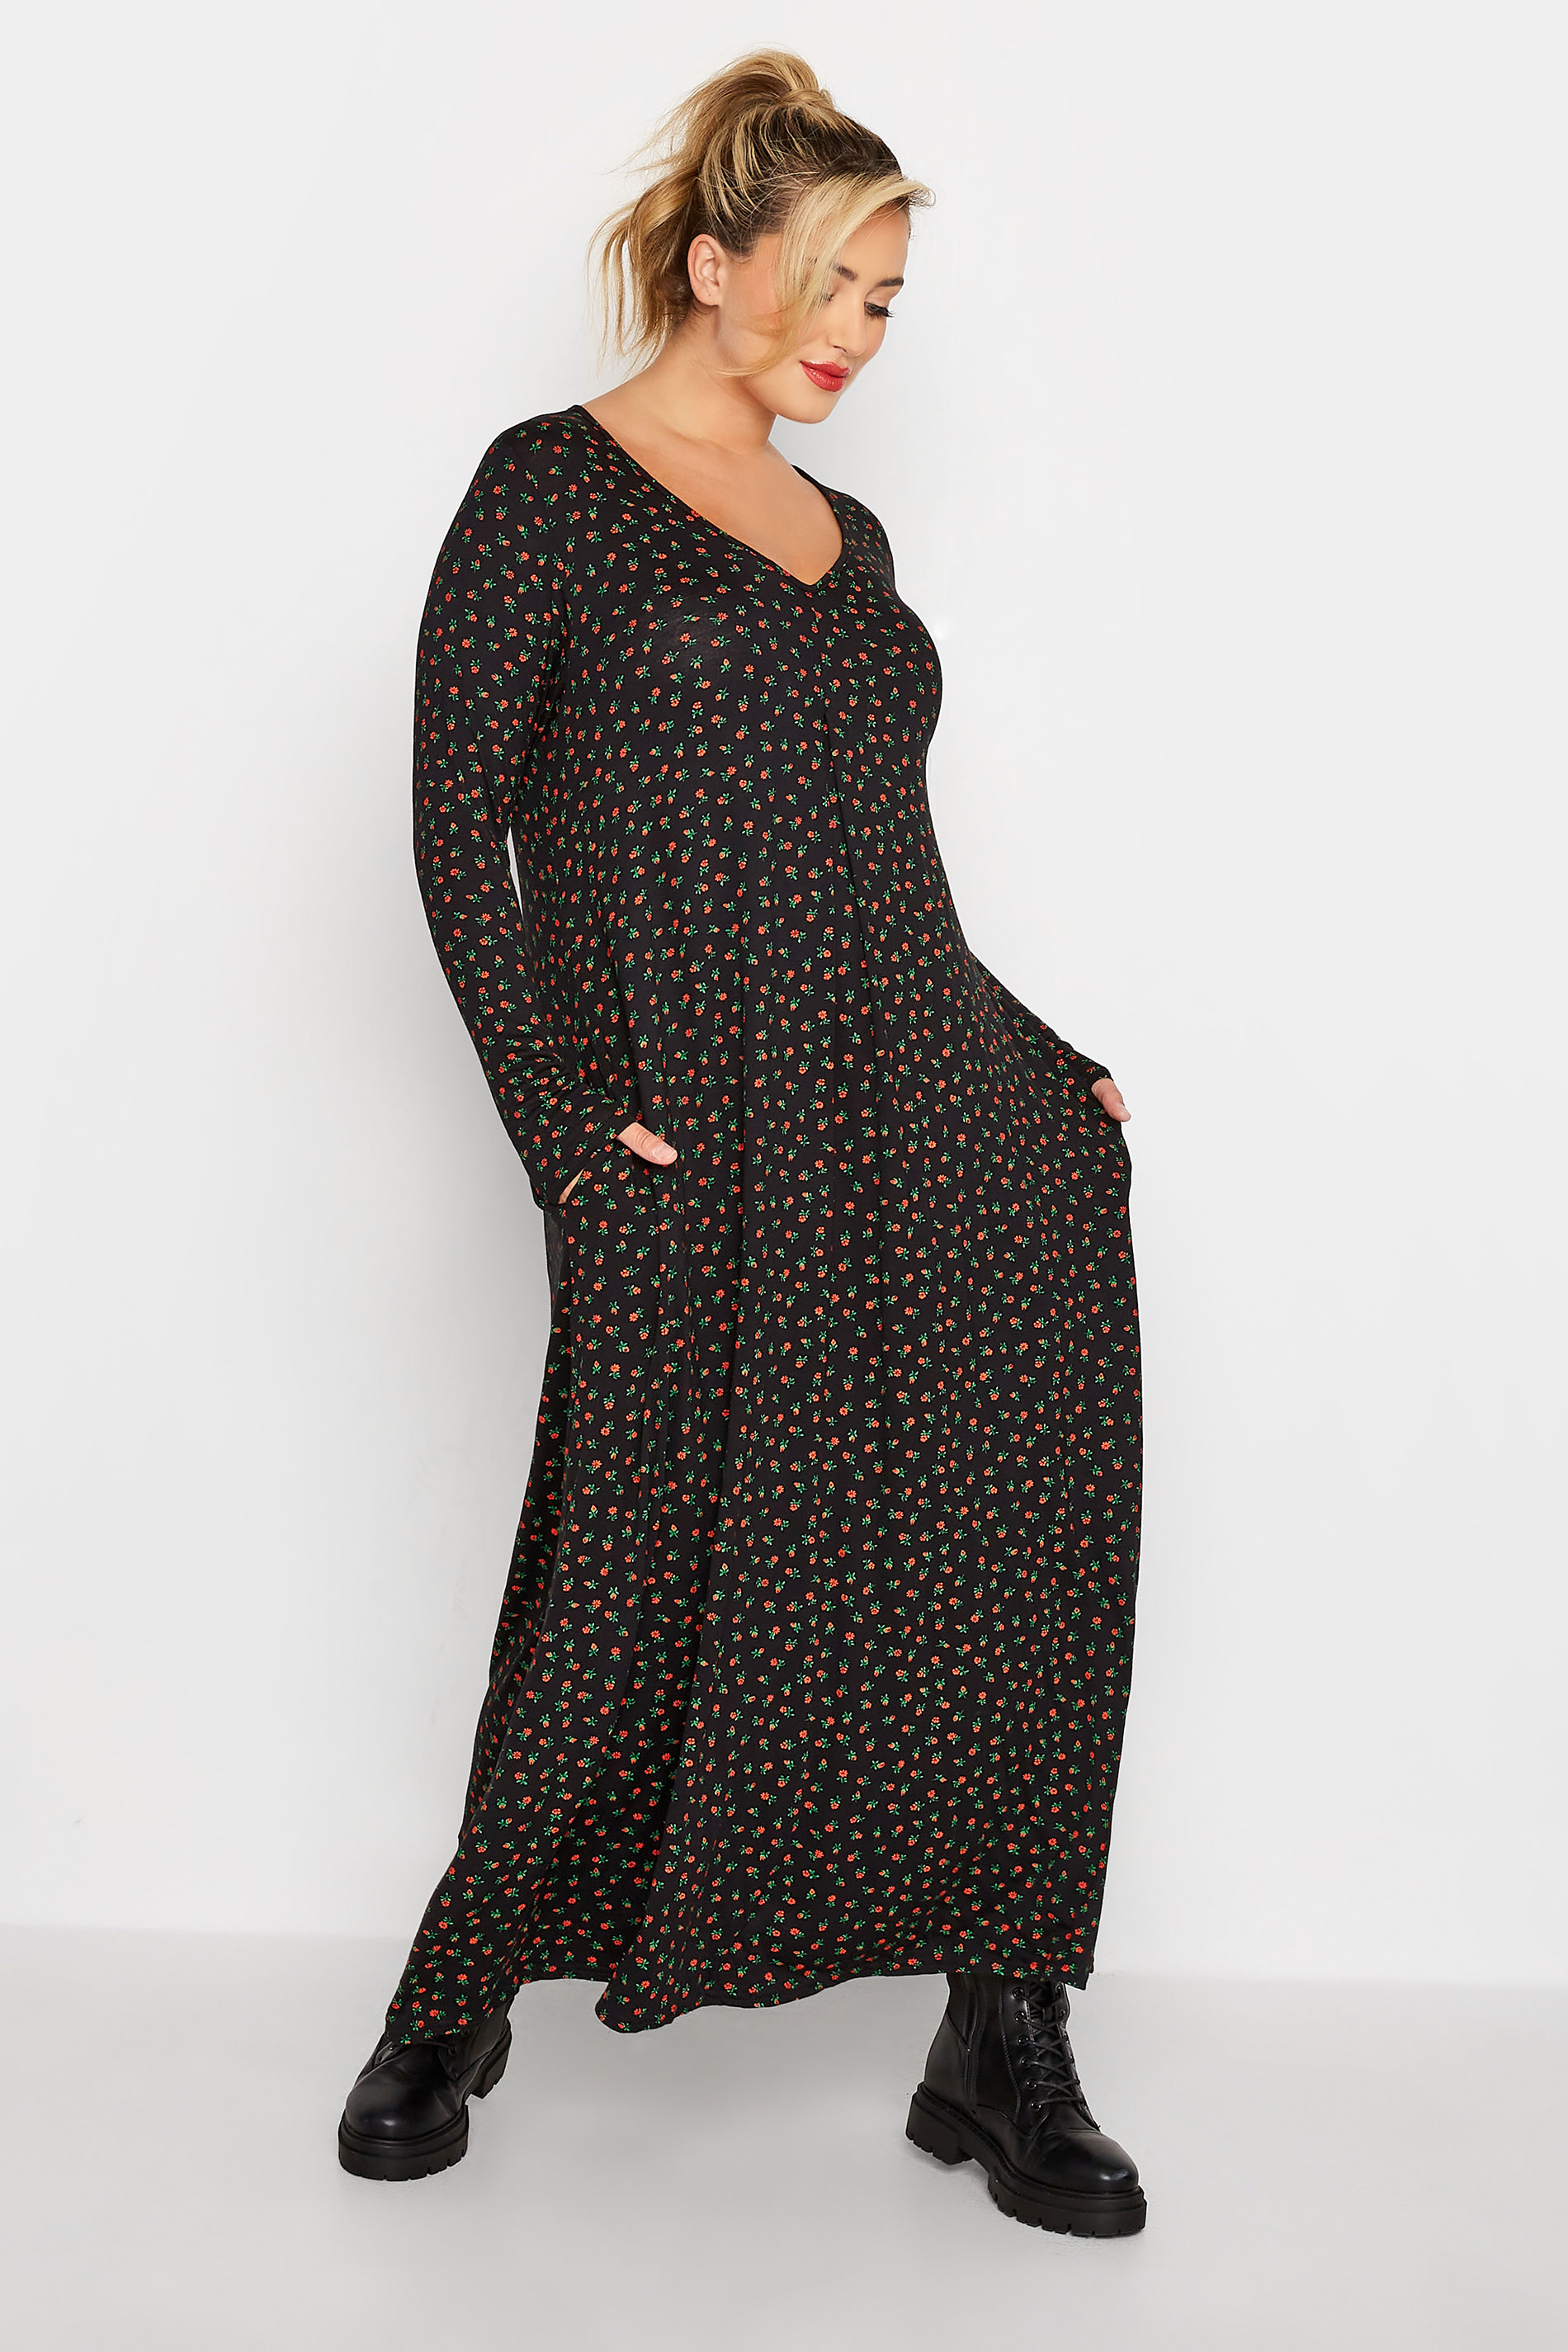 LIMITED COLLECTION Plus Size Black Ditsy Print Pleat Front Dress | Yours Clothing 1